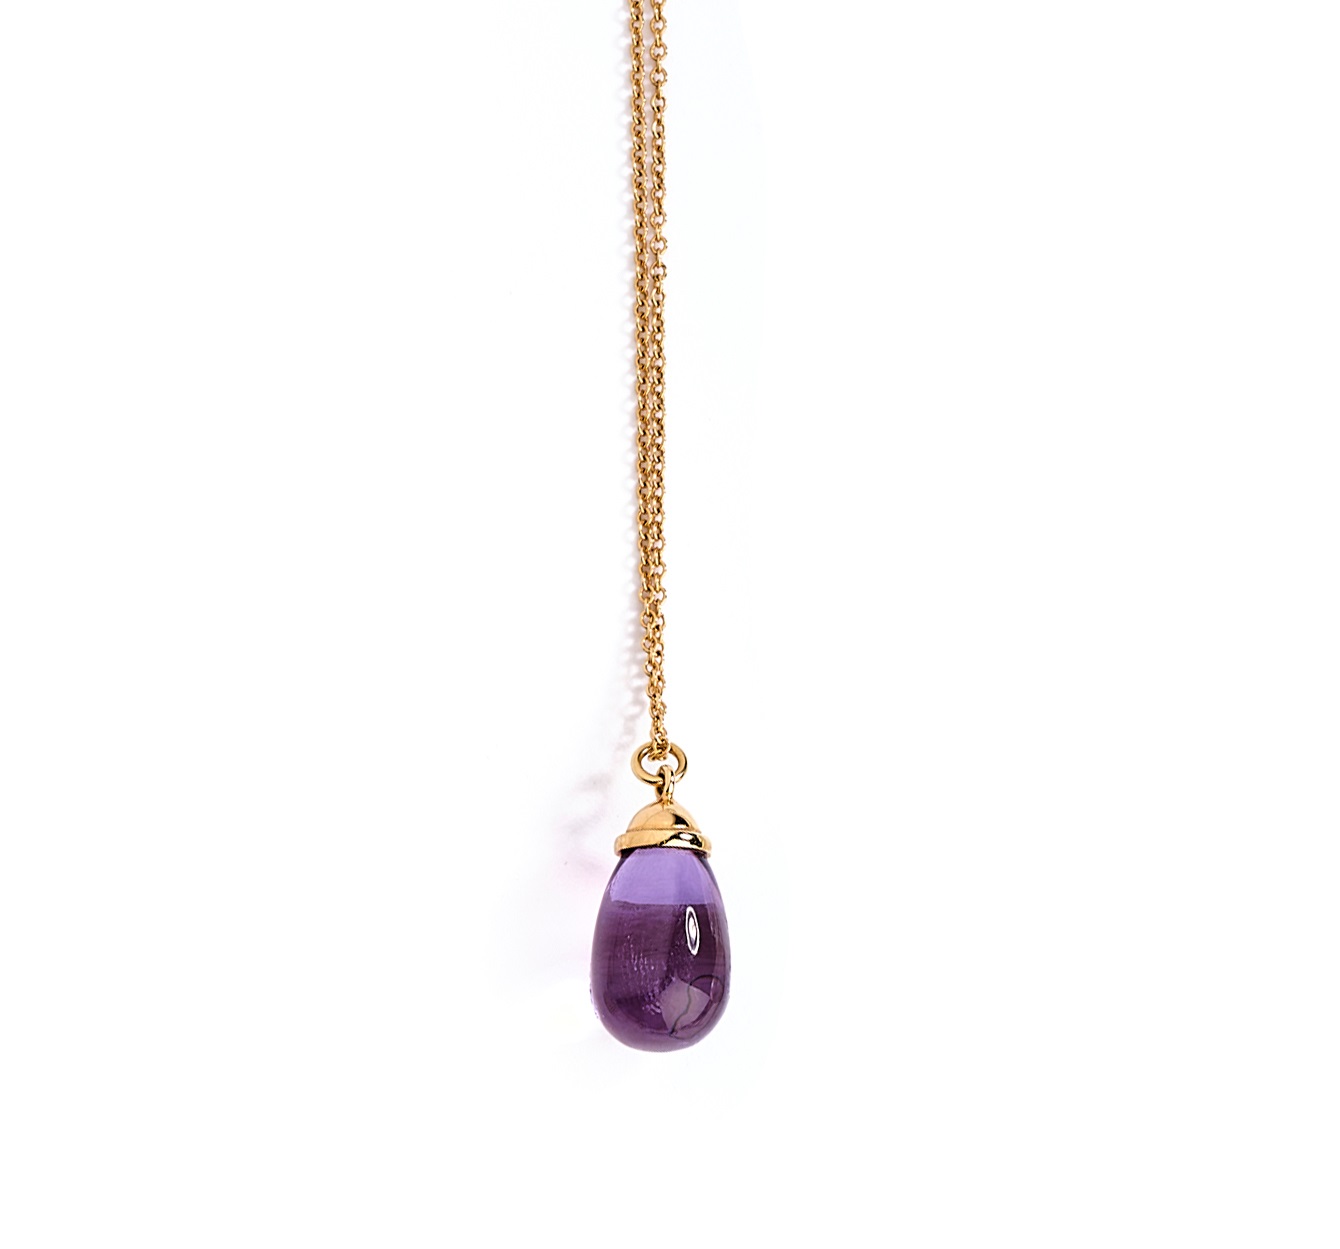 PALOMA PICASSO FOR TIFFANY & CO.: AMETHYST PENDANT